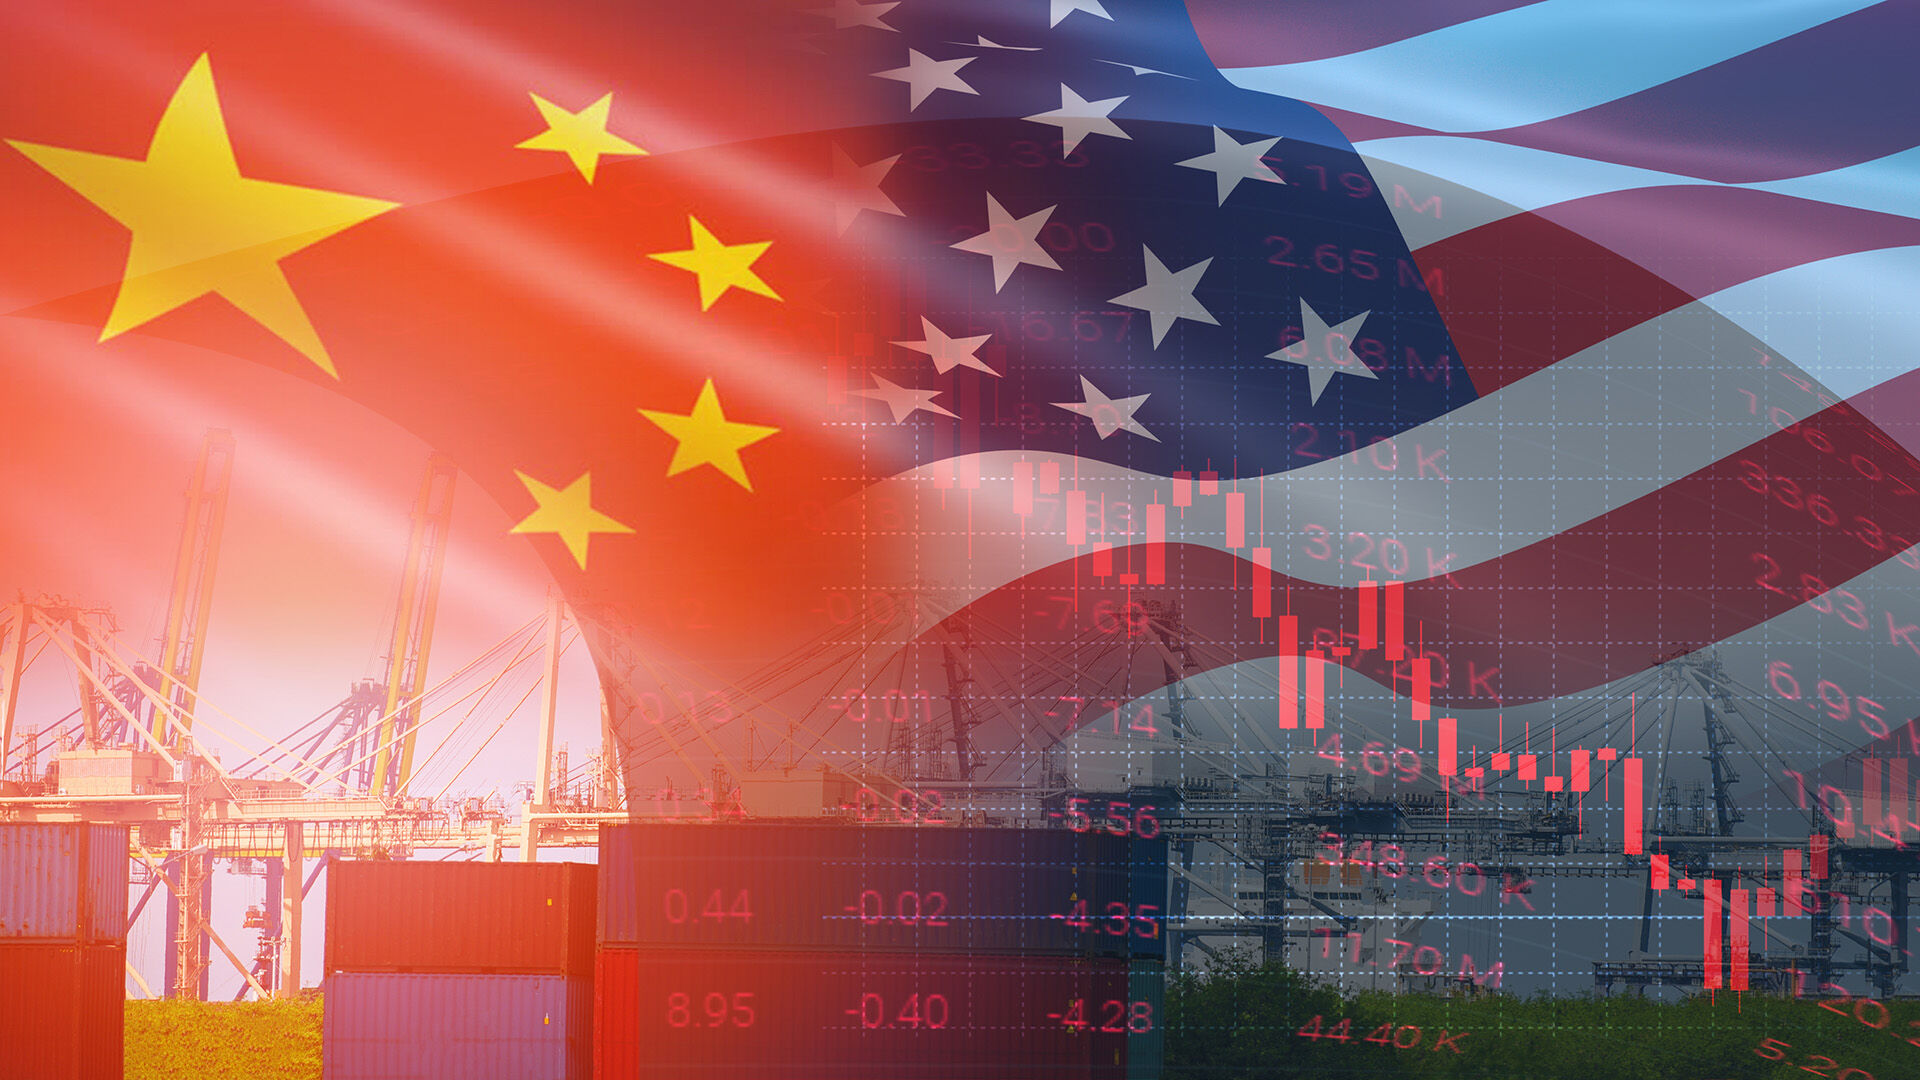 An American flag and Chinese flag stand side by side in the background, symbolizing the interconnectedness of global economies and the ongoing dynamics of international trade.